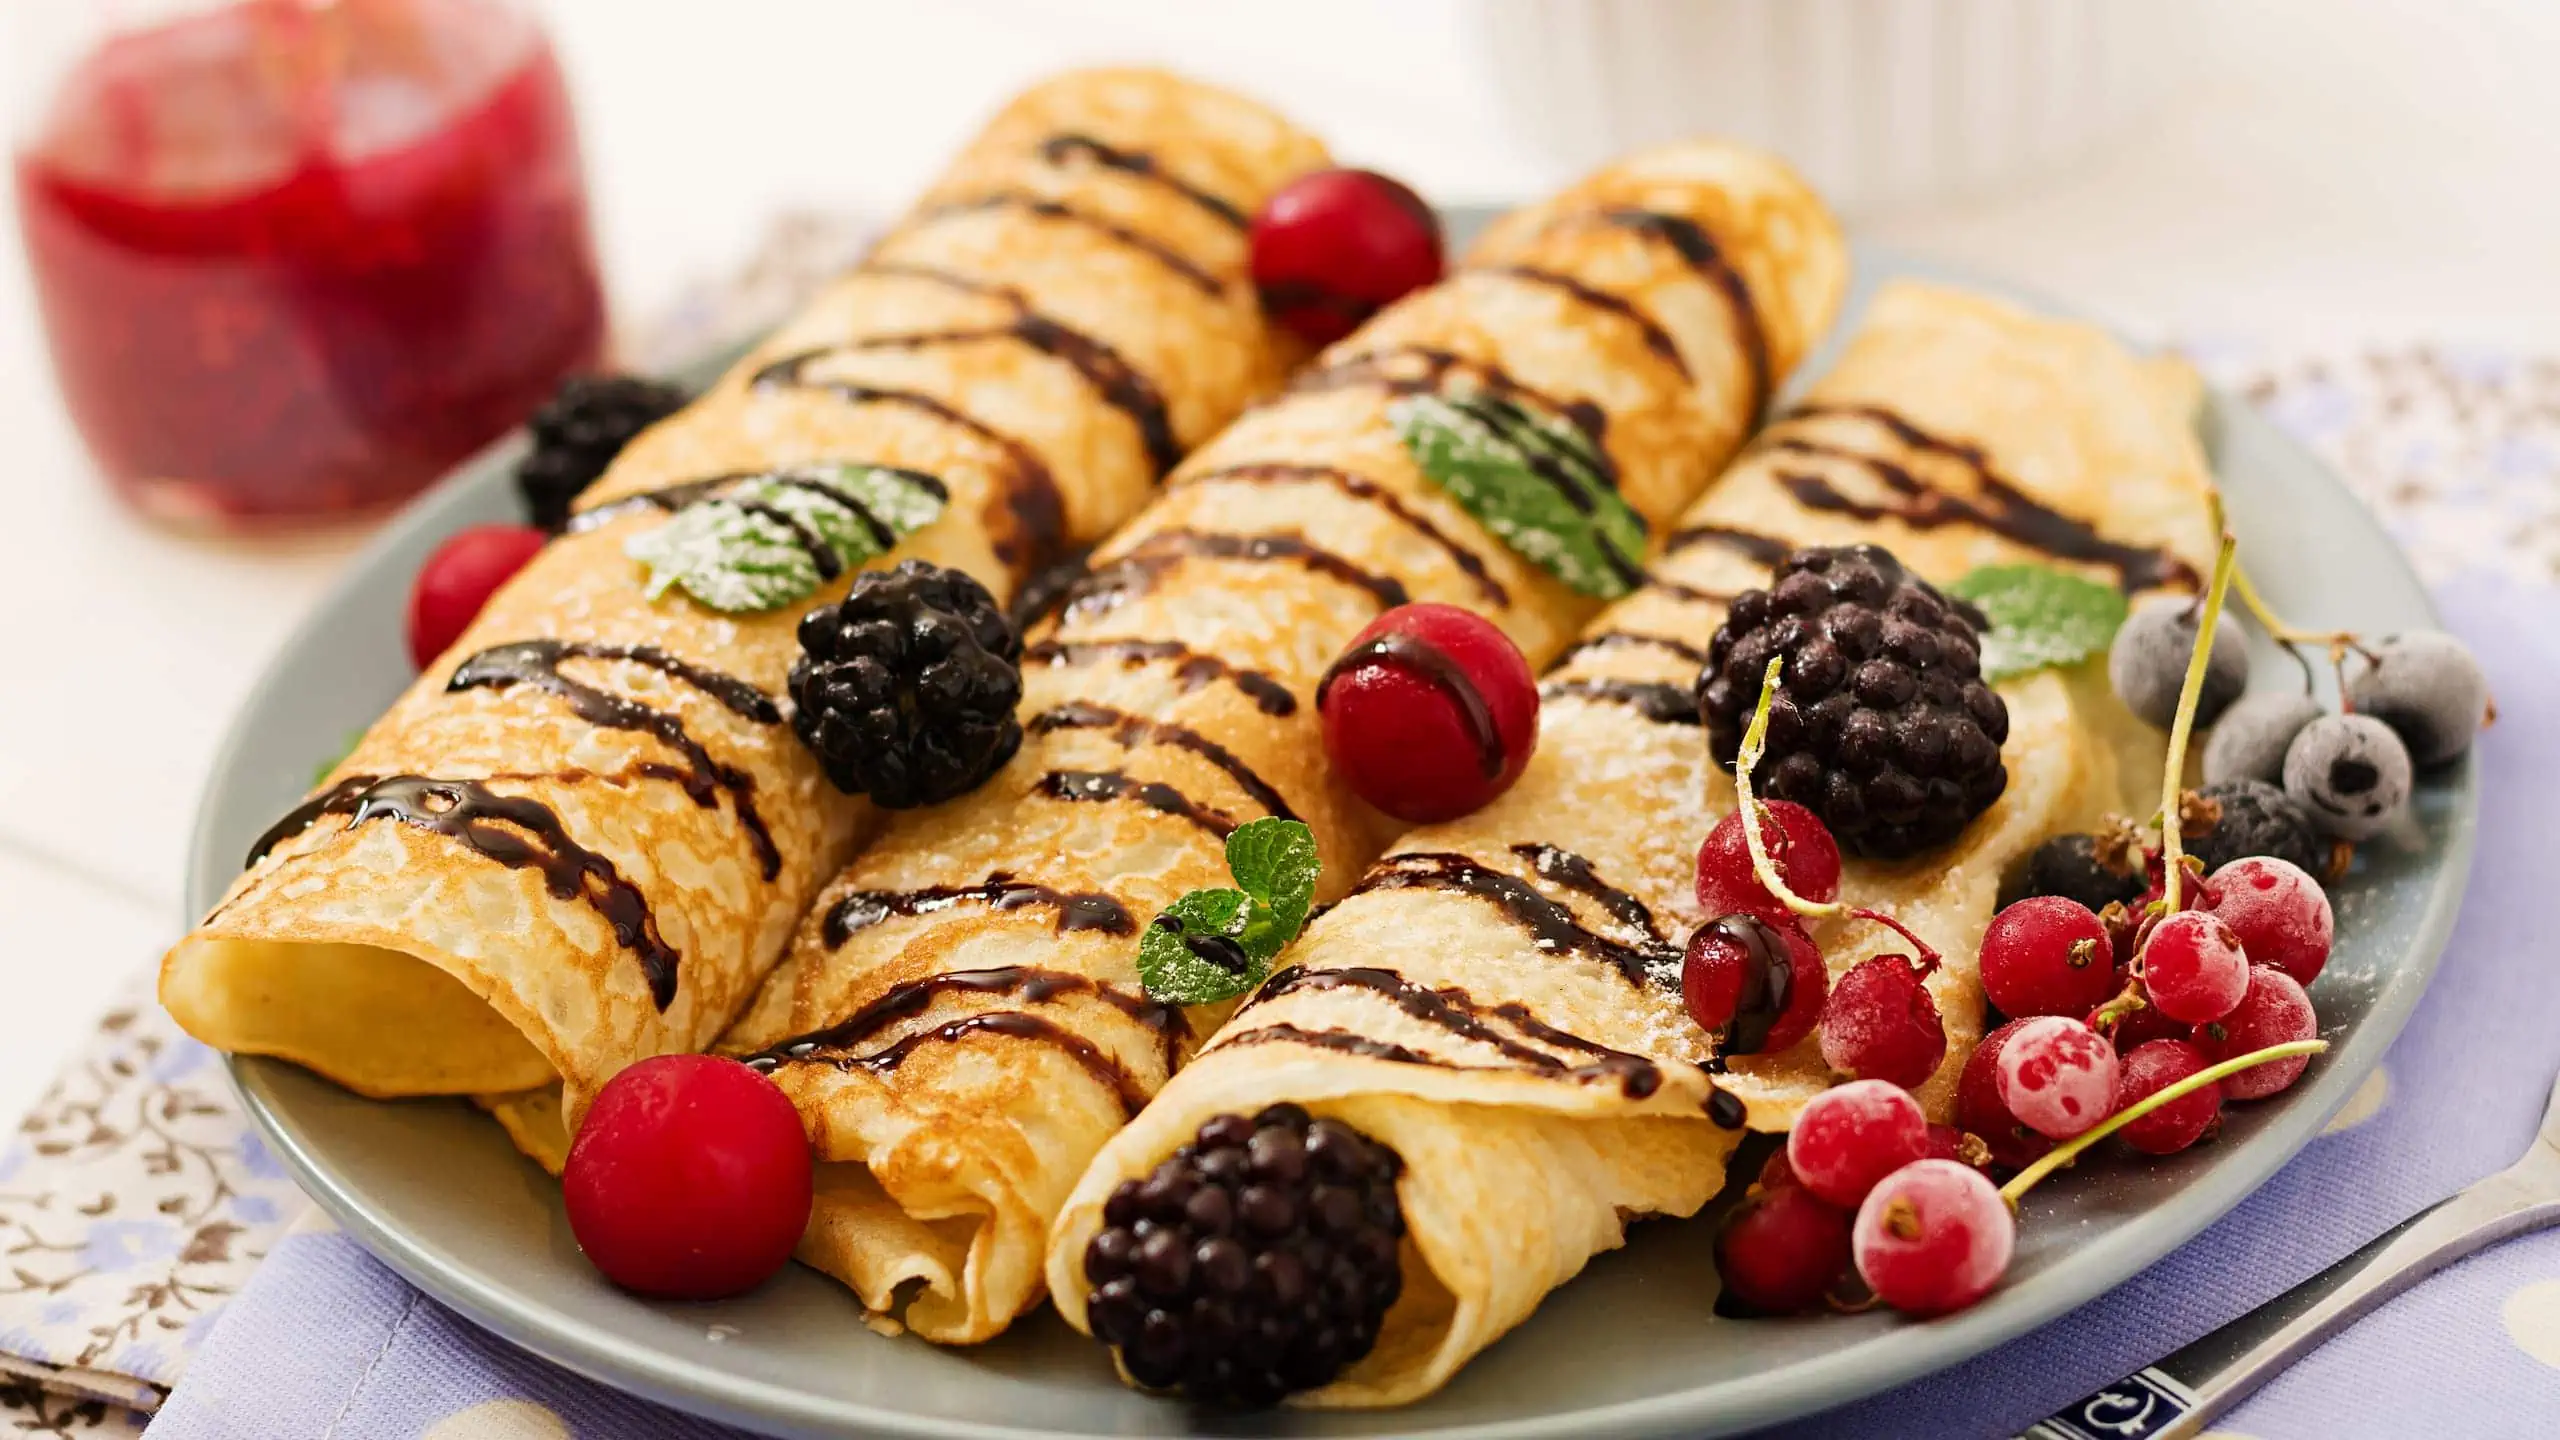 Our version of a single-serving crepe recipe